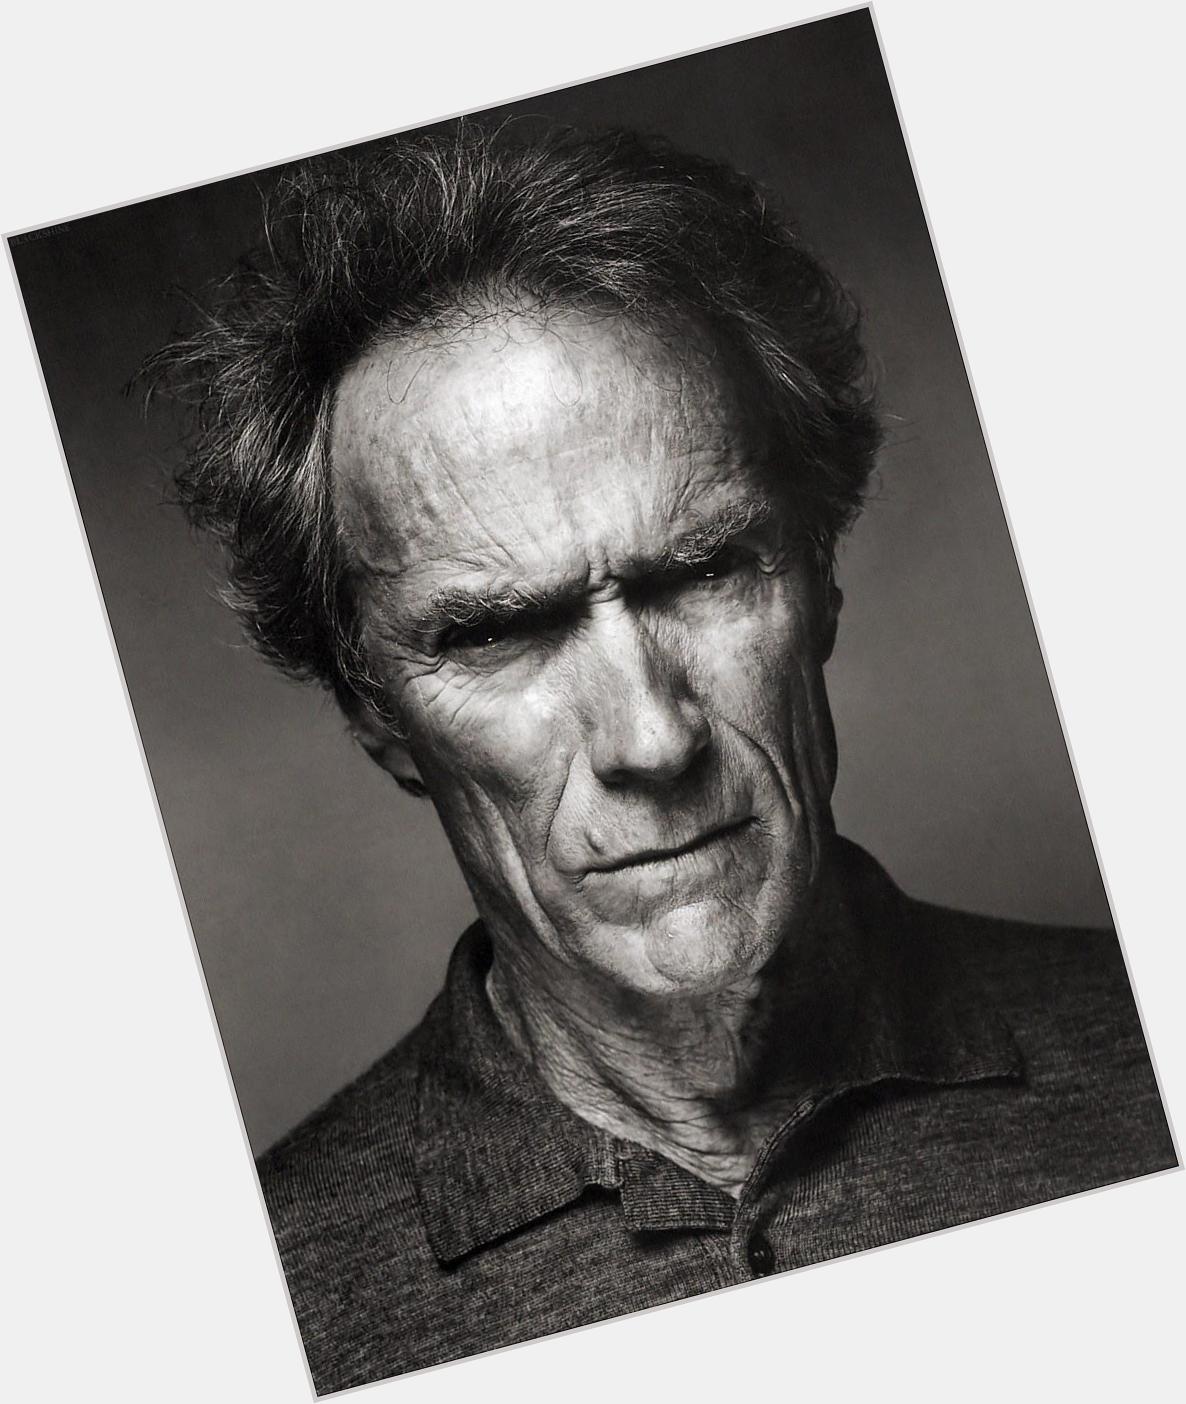 Happy 85th Birthday Clint Eastwood! What\s your favorite of his films? 